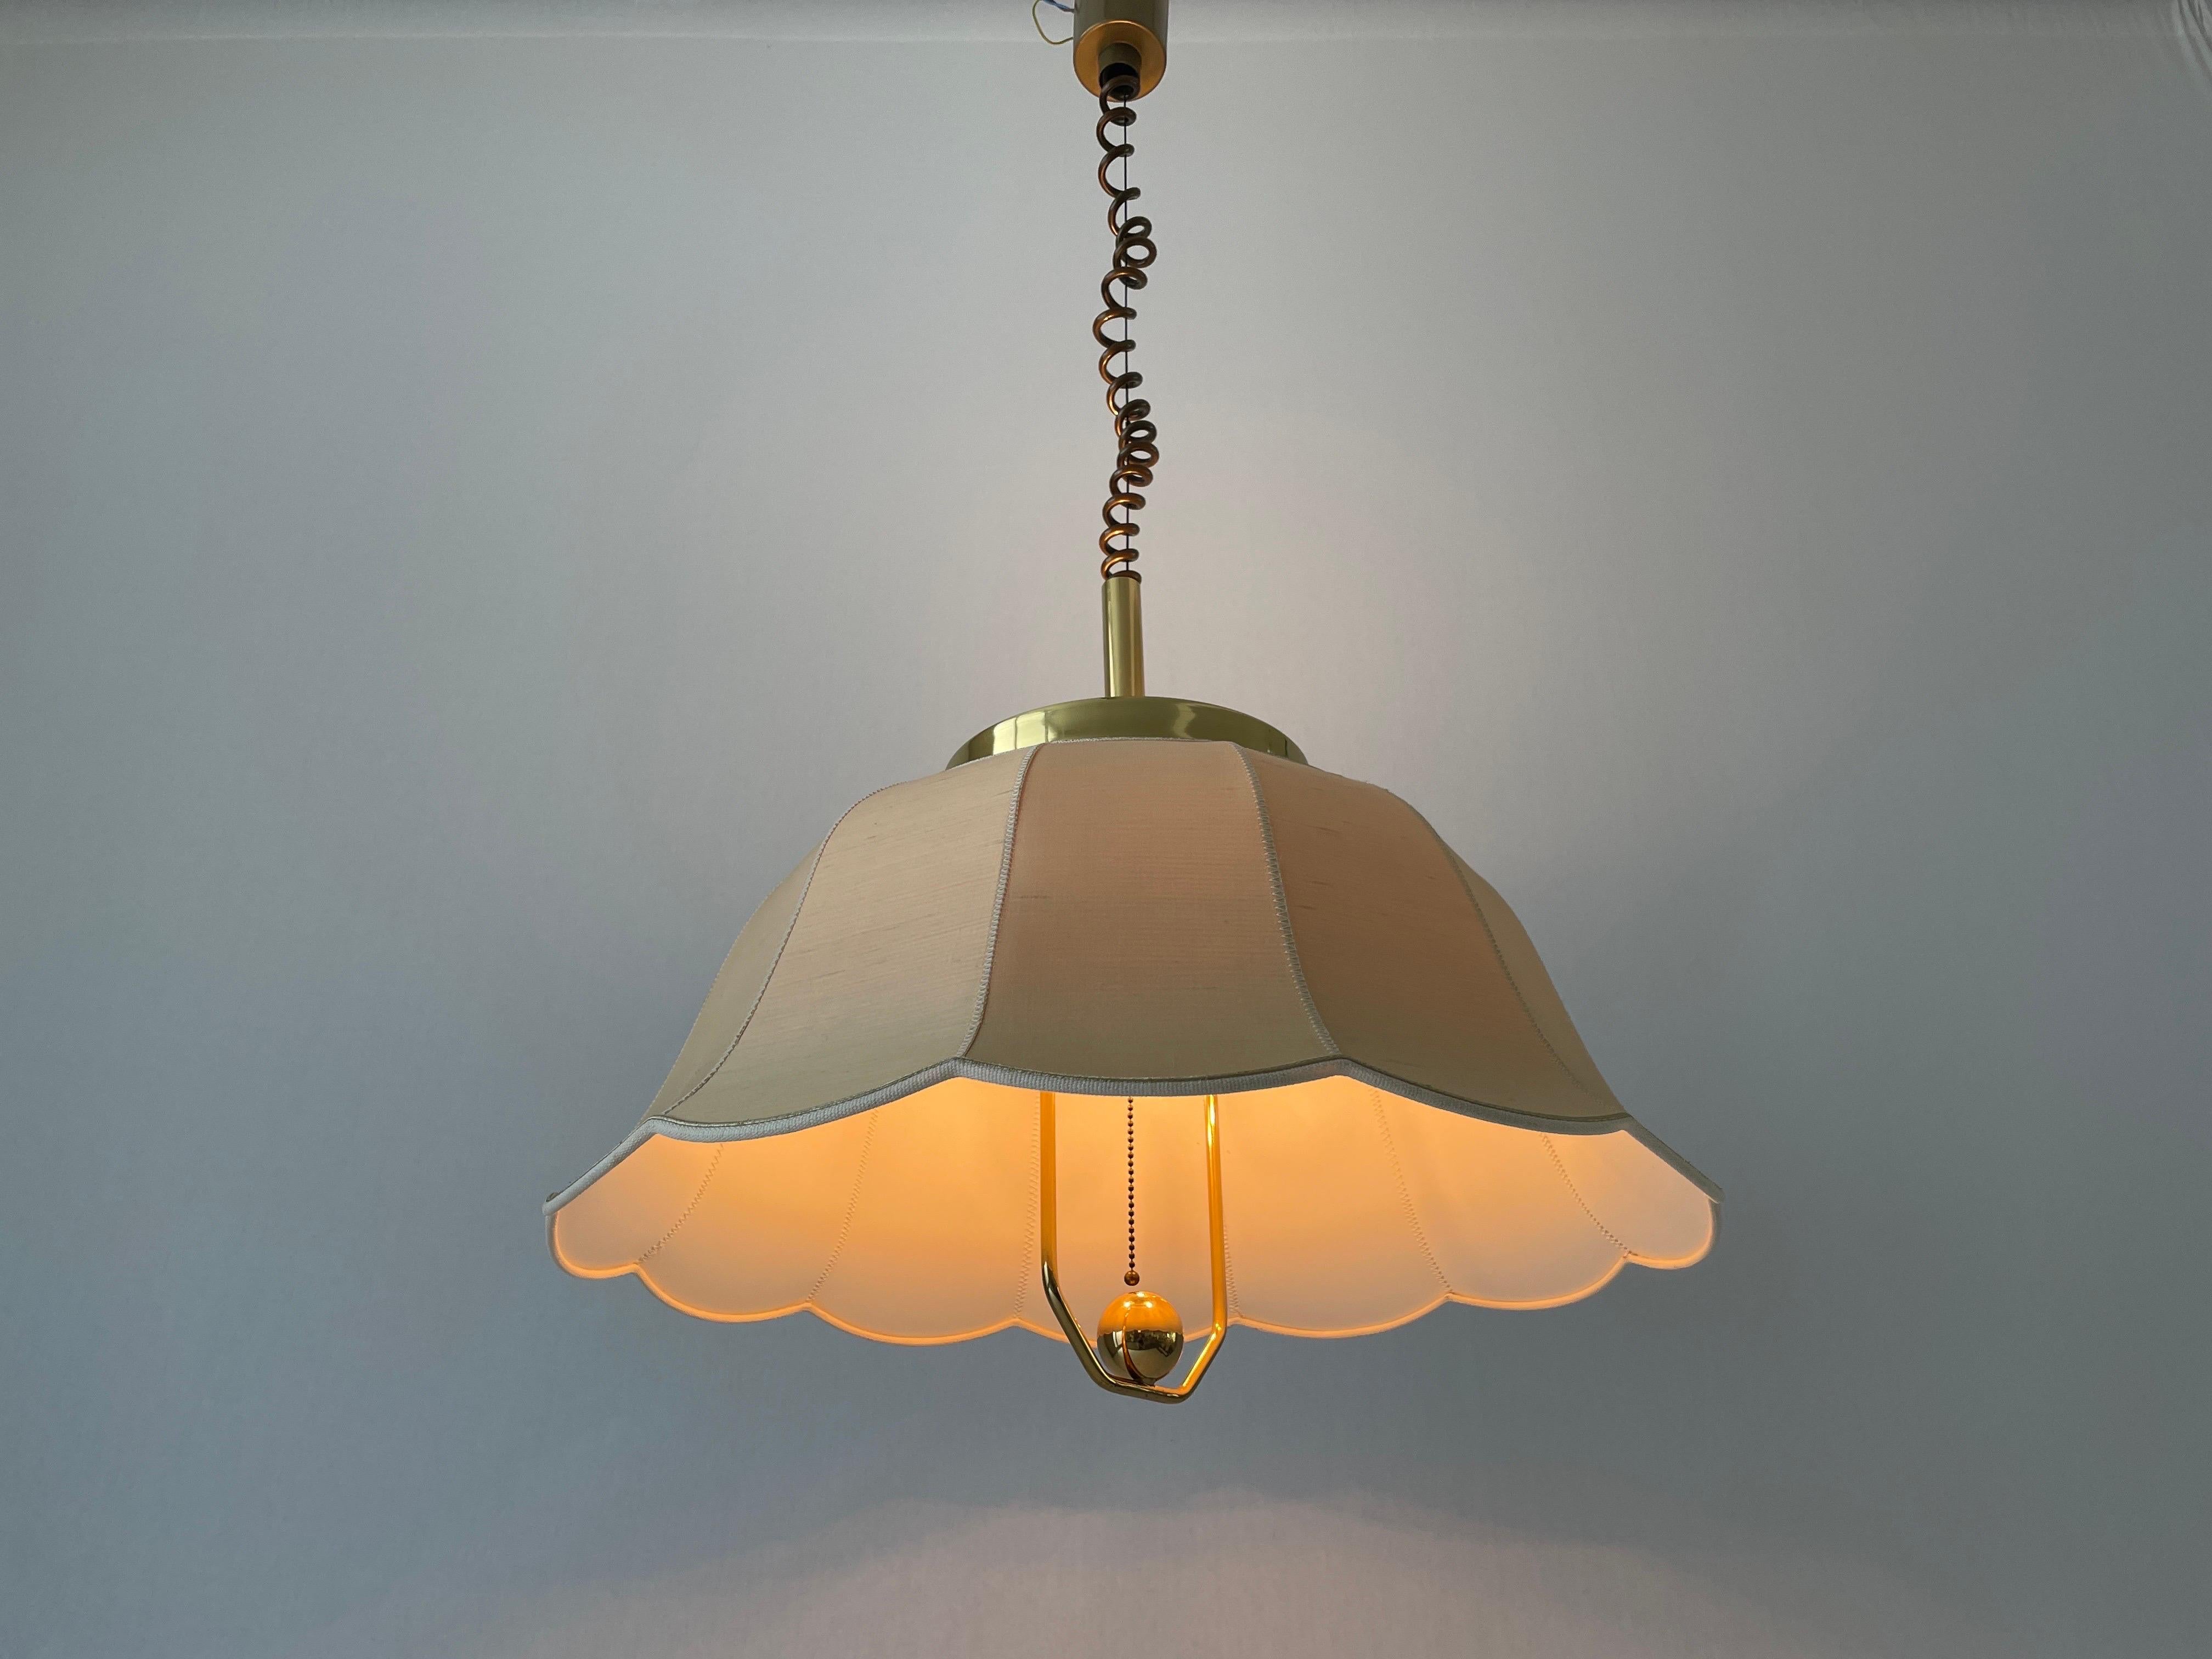 Fabric and Brass 5 socket Adjustable Shade Pendant Lamp by WKR, 1970s, Germany For Sale 11